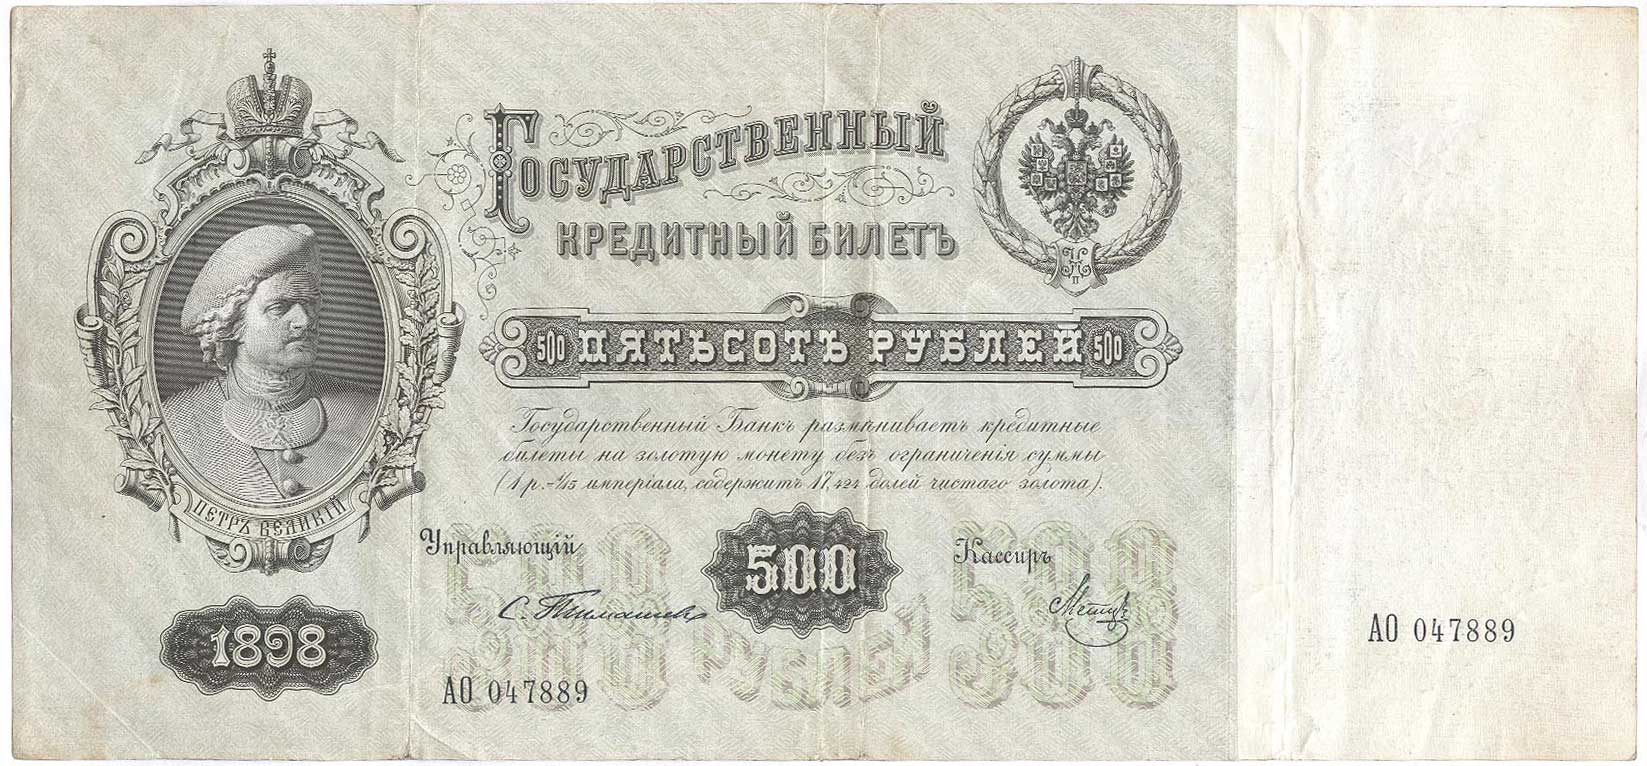 Russian Empire State Credit bank note 500 rubles 1898 / Timashev